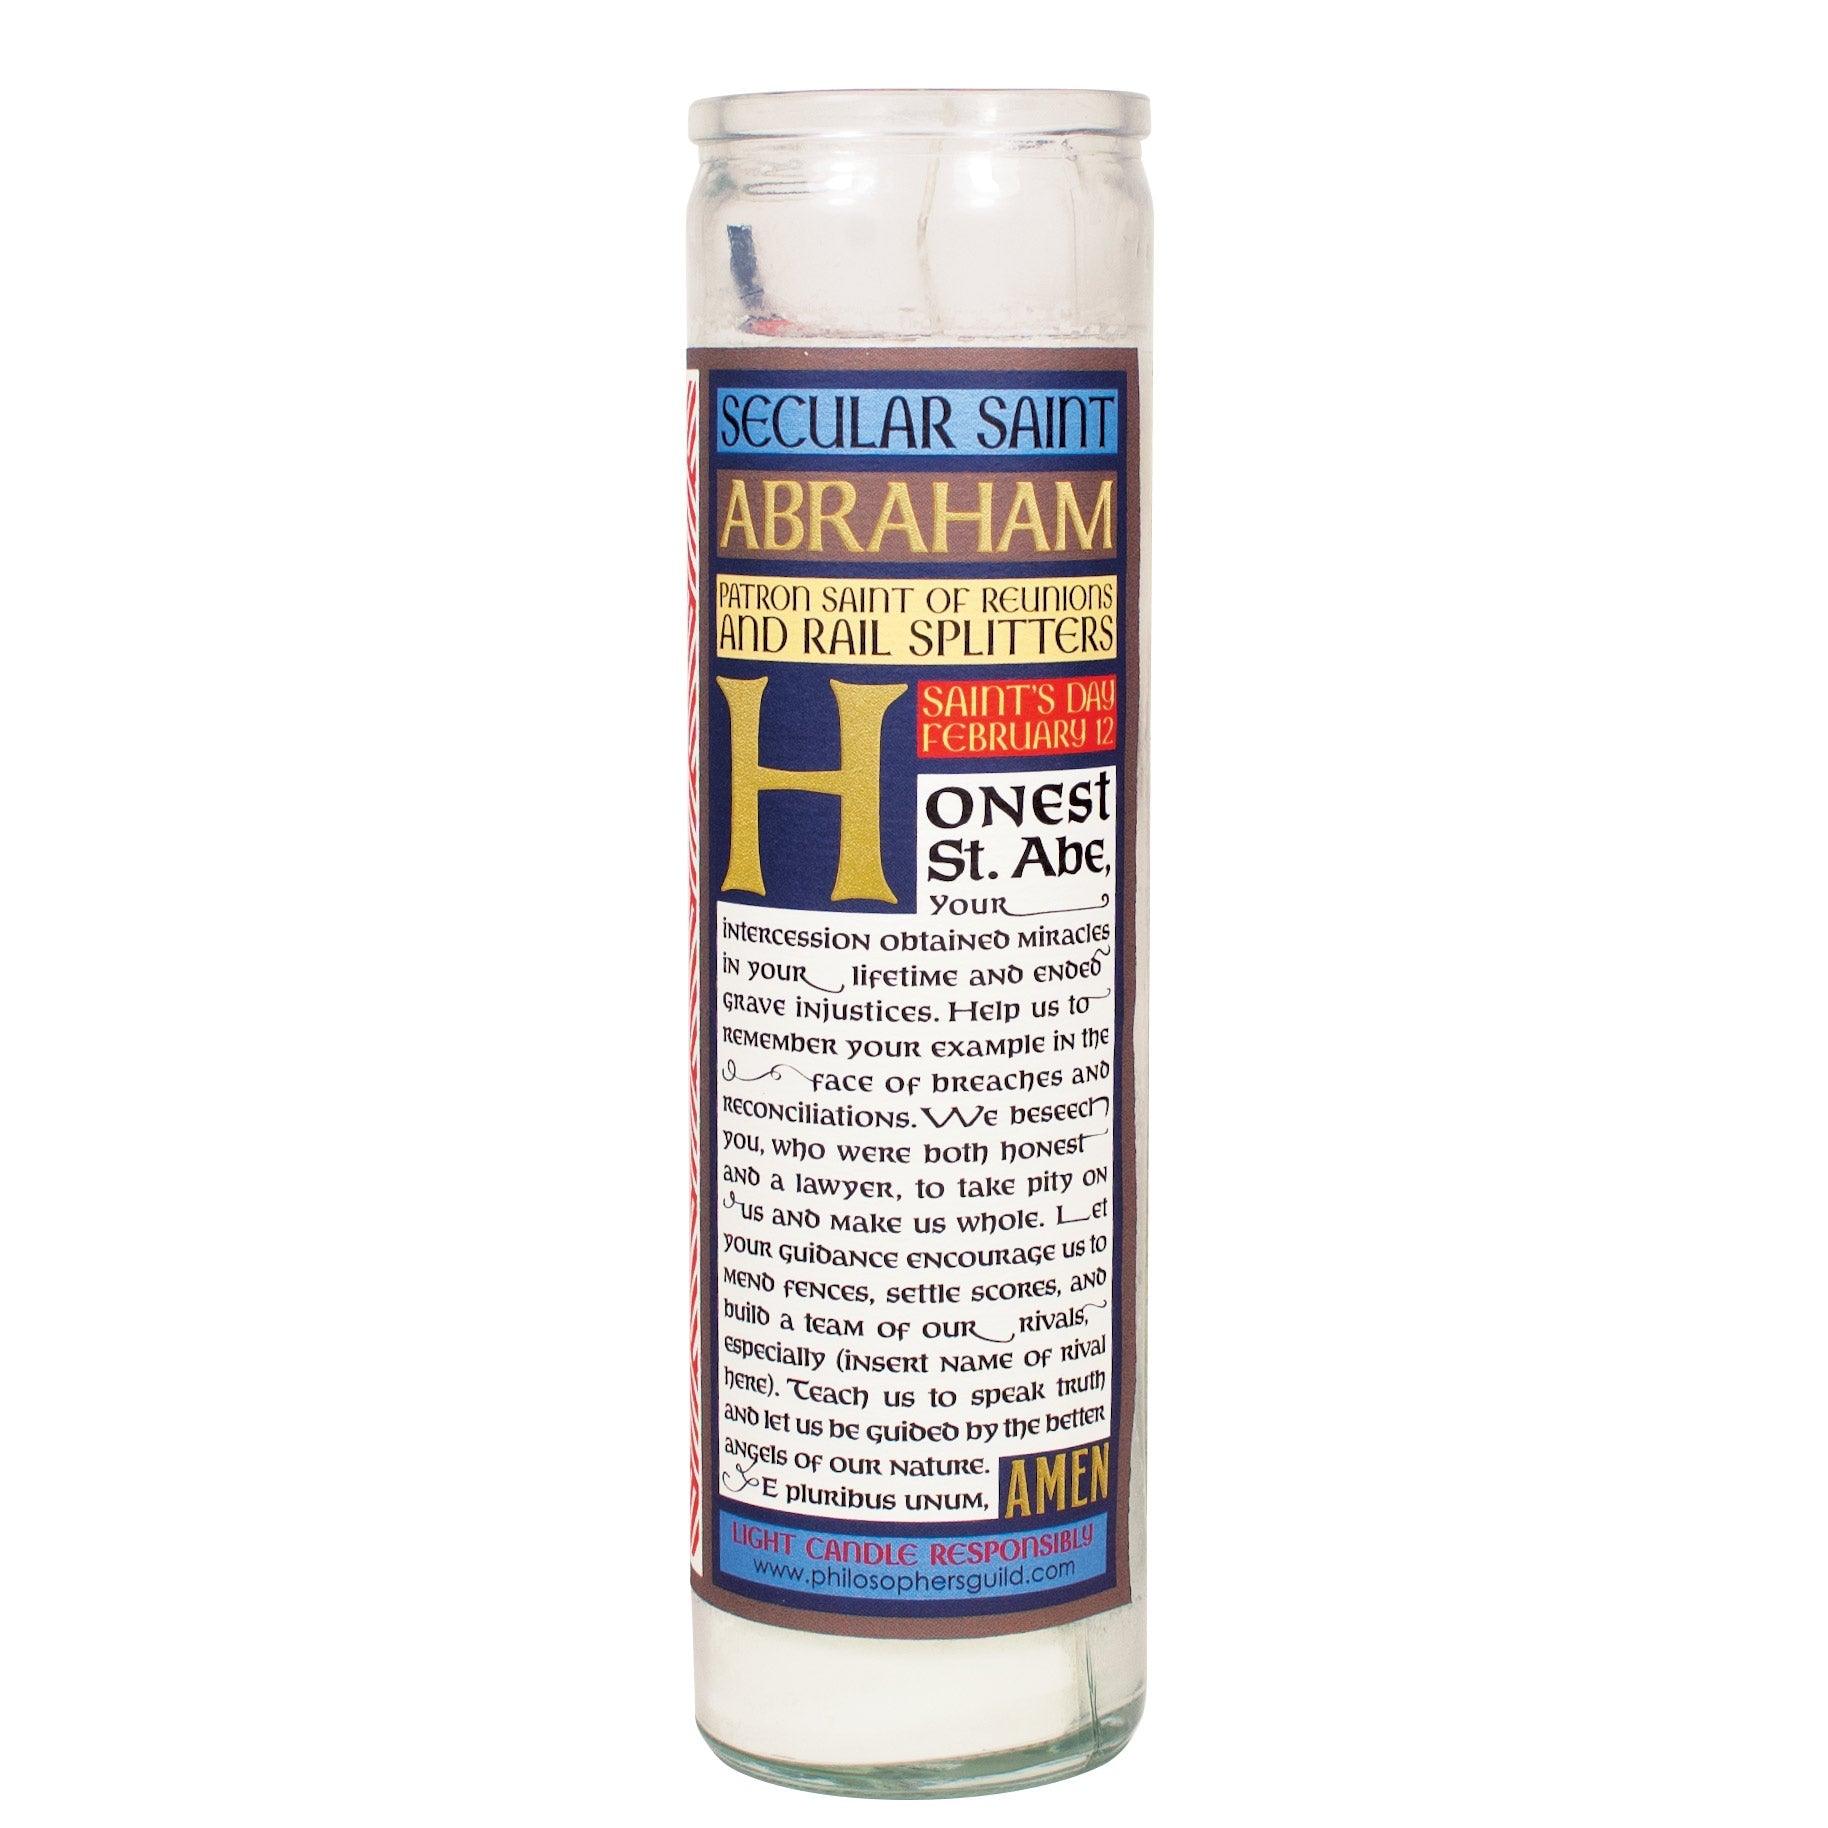 Product photo of Abraham Lincoln Secular Saint Candle, a novelty gift manufactured by The Unemployed Philosophers Guild.